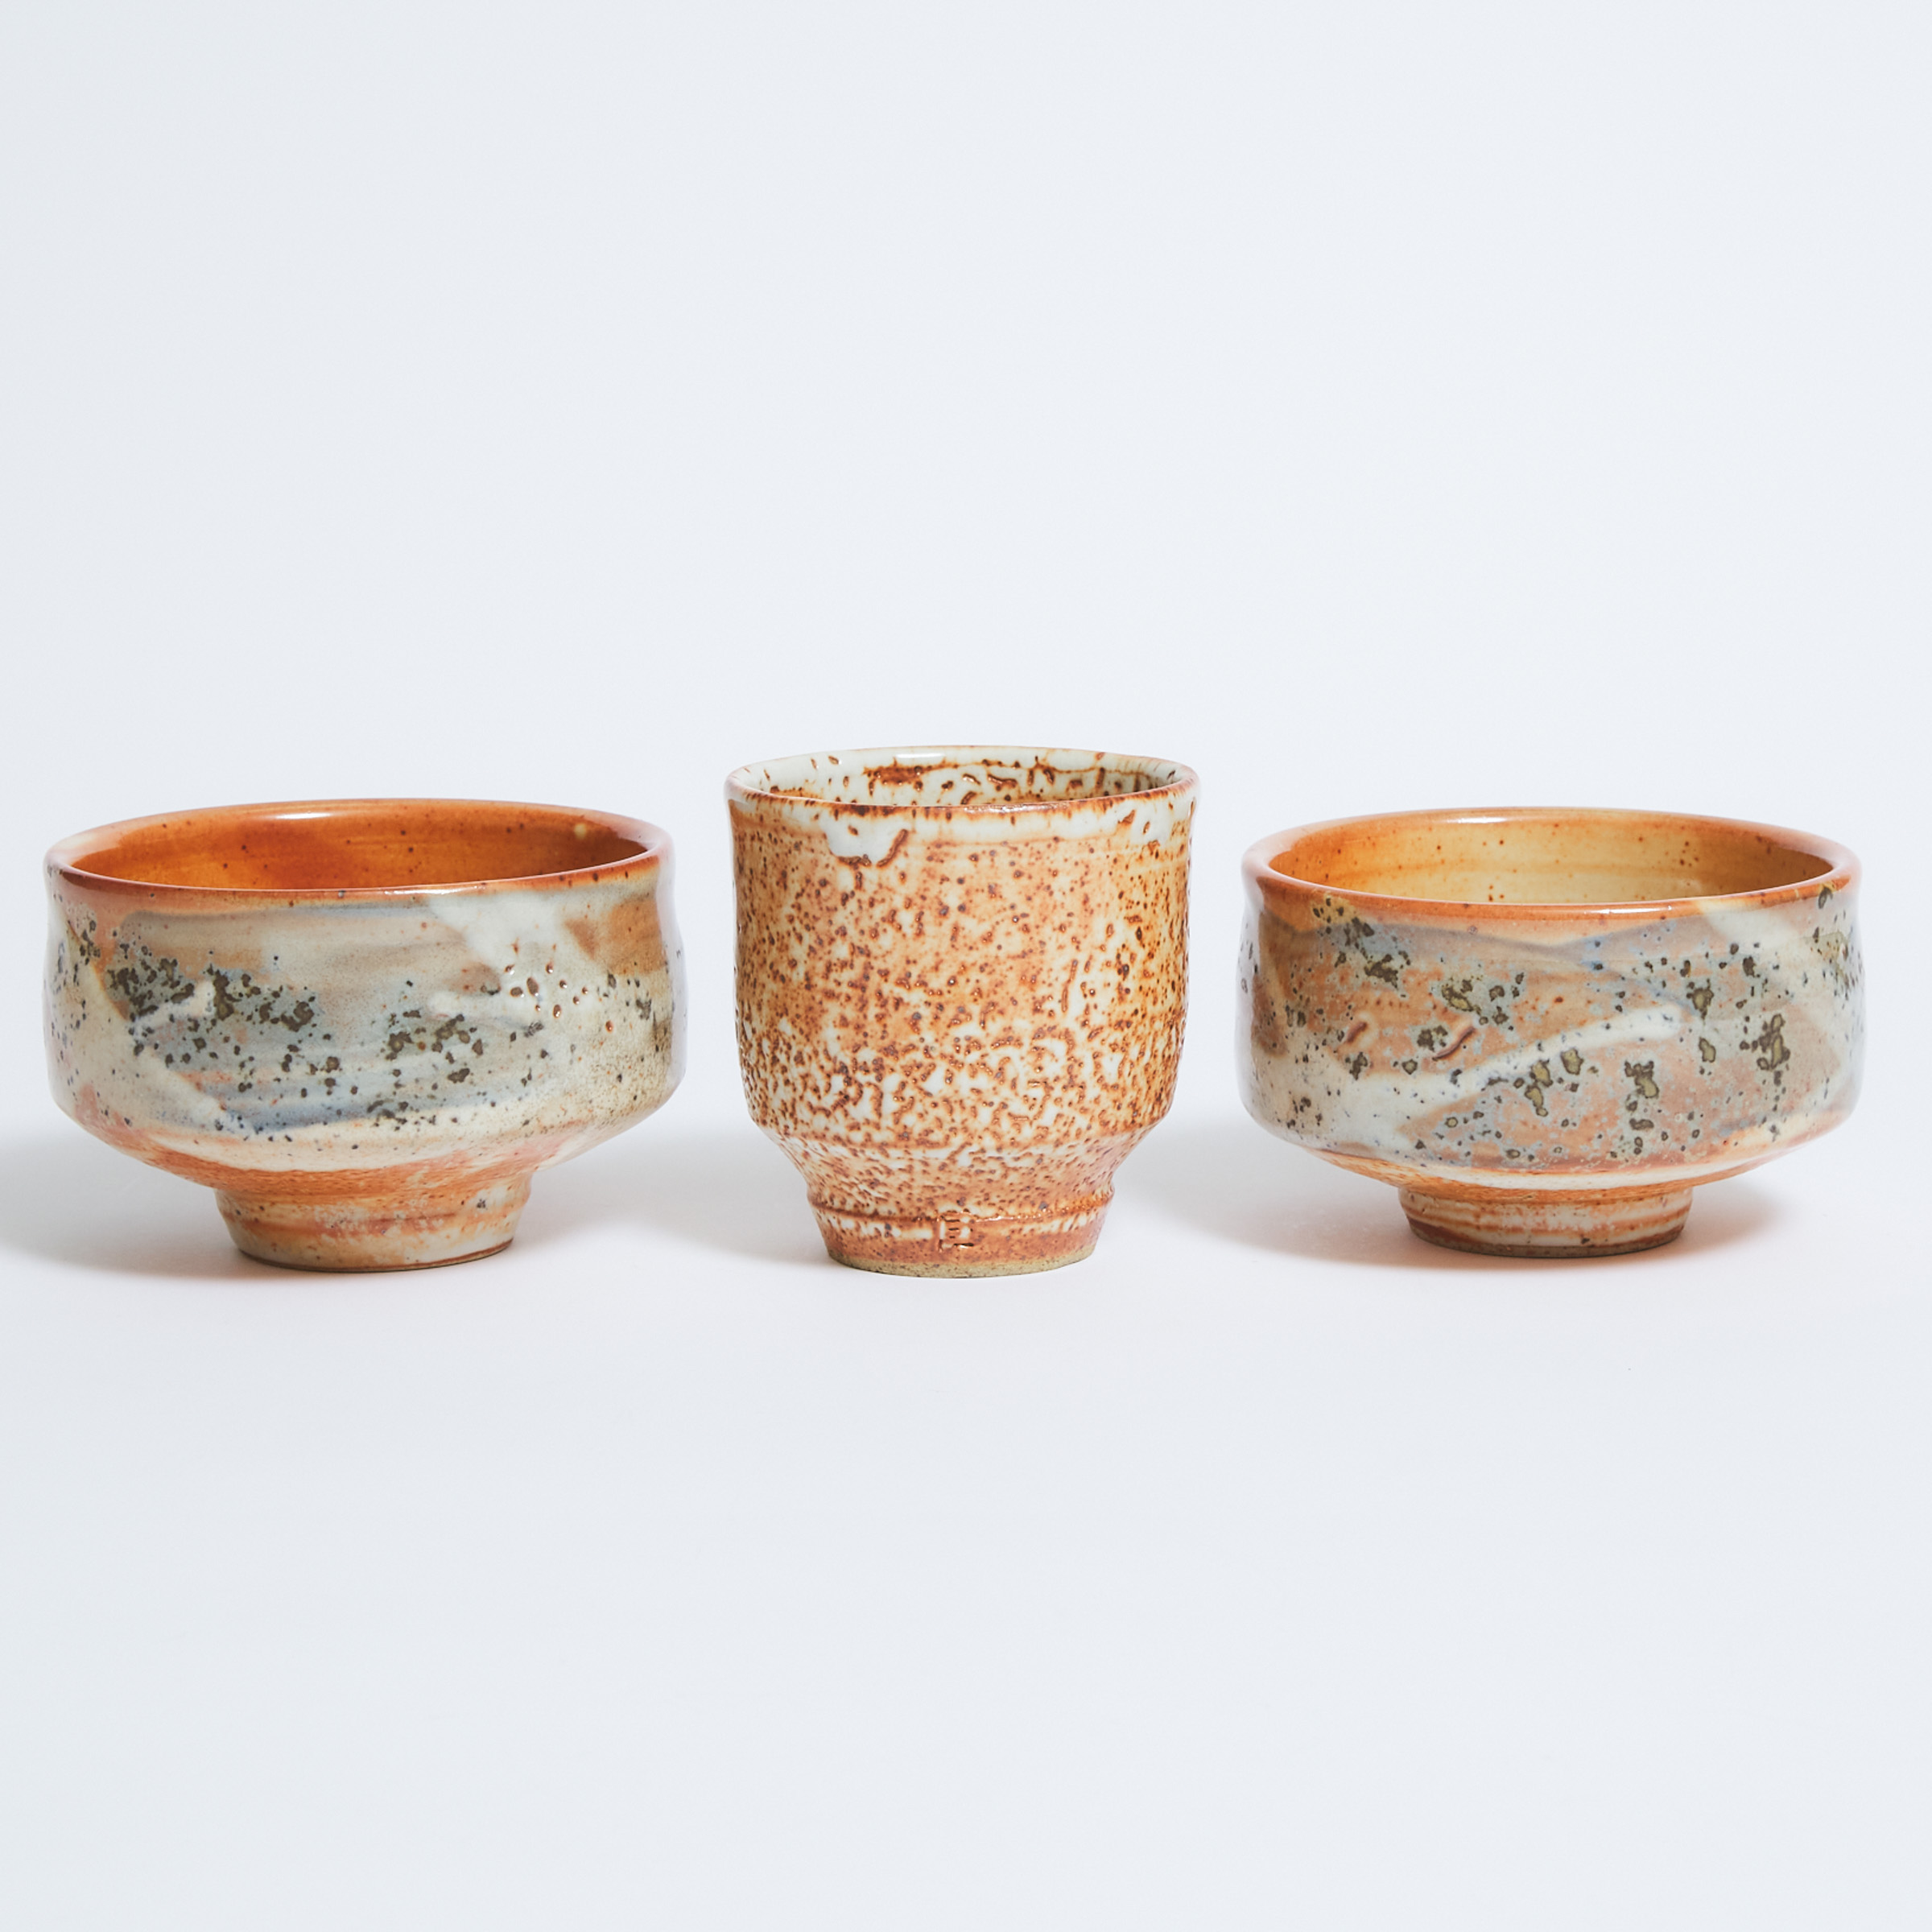 Robert Archambeau (Canadian, 1933-2022), Glazed Stoneware Cup and a Pair of Bowls, late 20th century